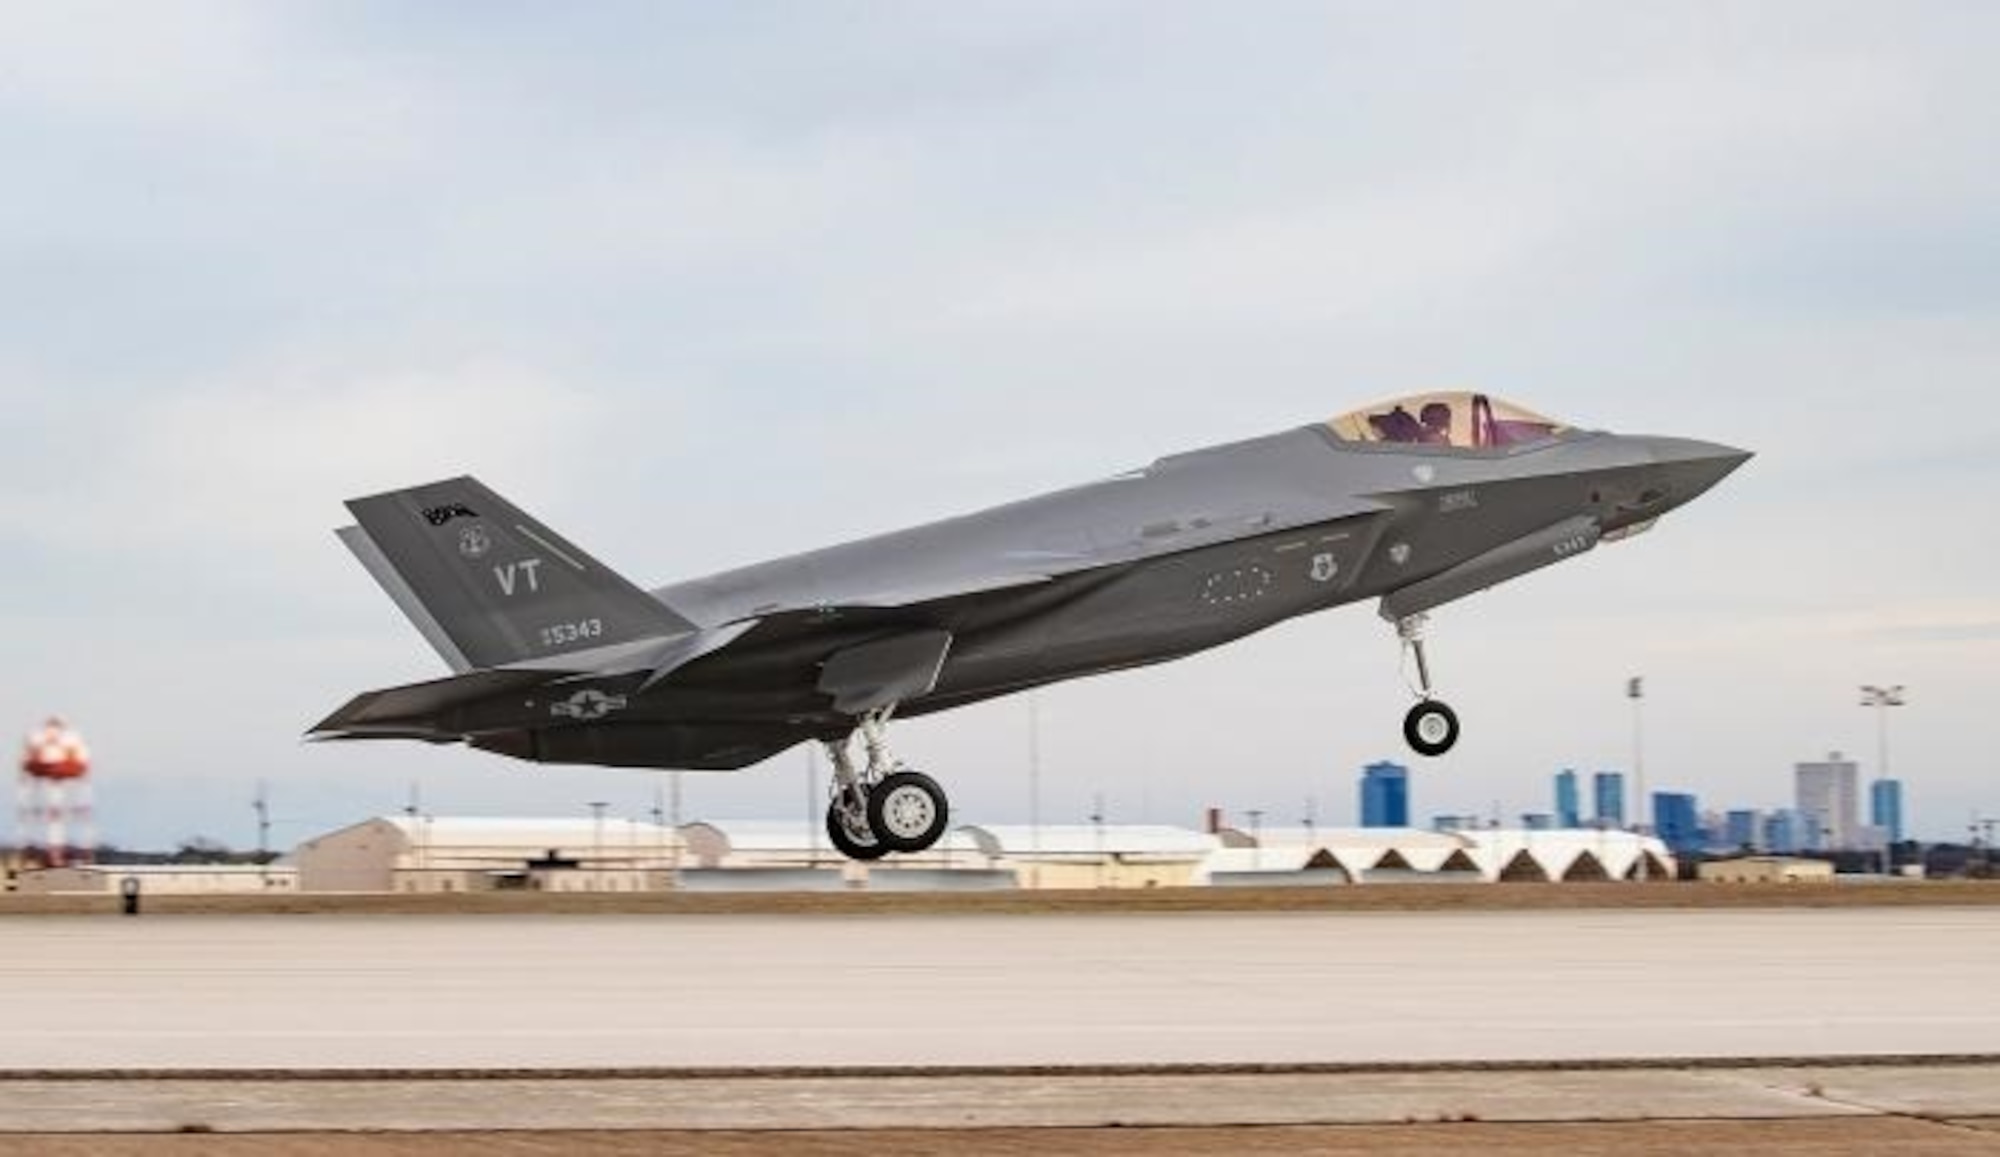 The support provided by Office of Special Investigations Office of Special Projects Detachment 9 ensures the 500th F-35 aircraft will be delivered to Burlington Air National Guard Base, Vt. (Courtesy photo)